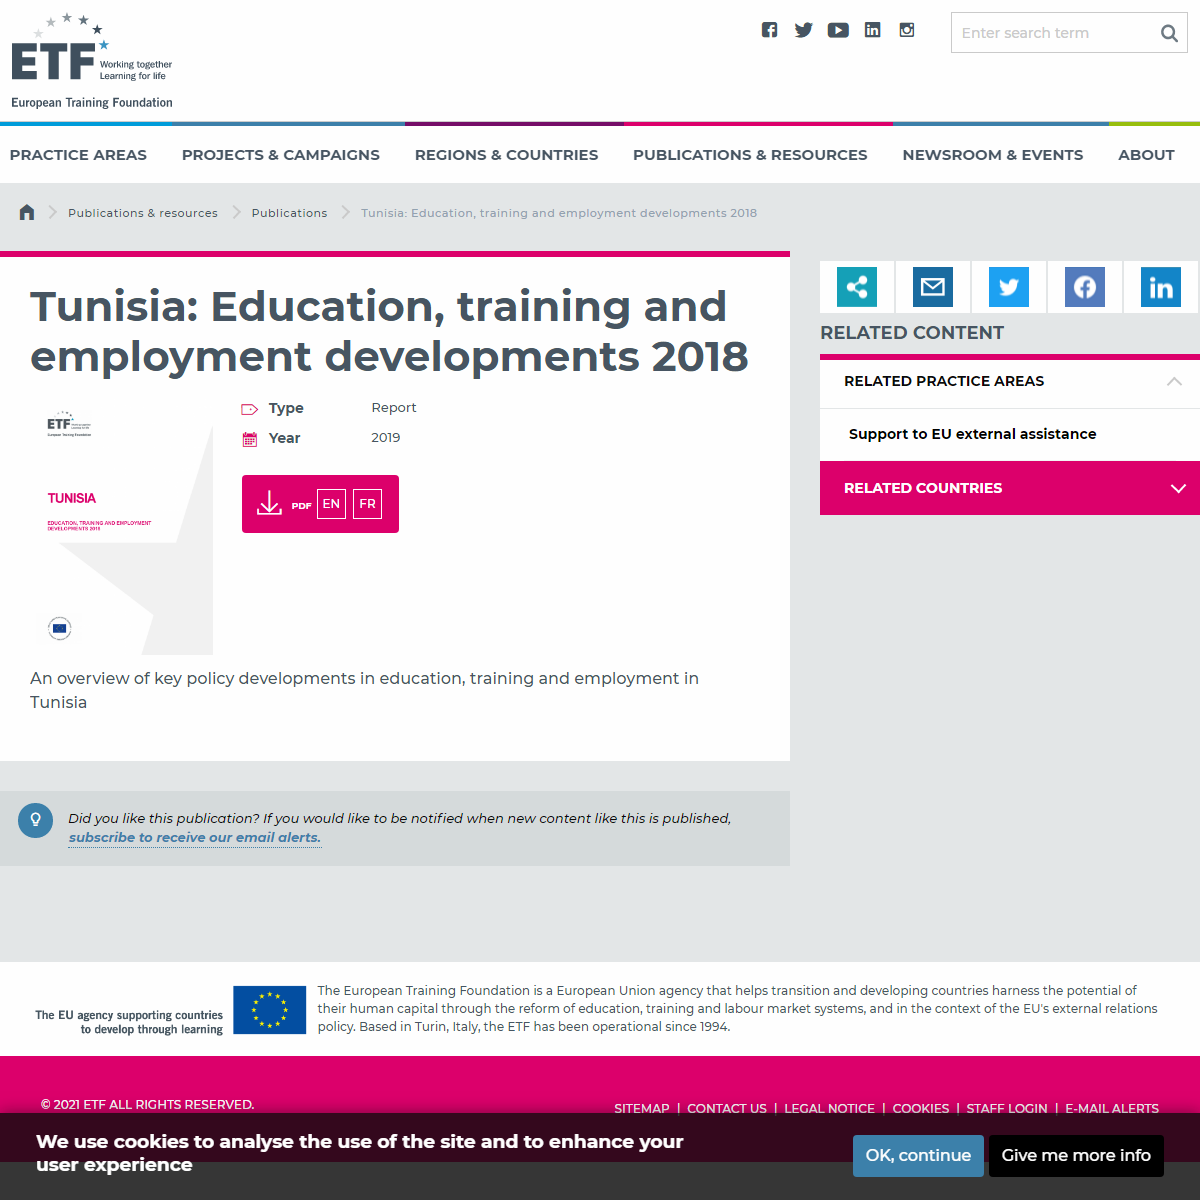 A complete backup of https://www.etf.europa.eu/en/publications-and-resources/publications/tunisia-education-training-and-employm